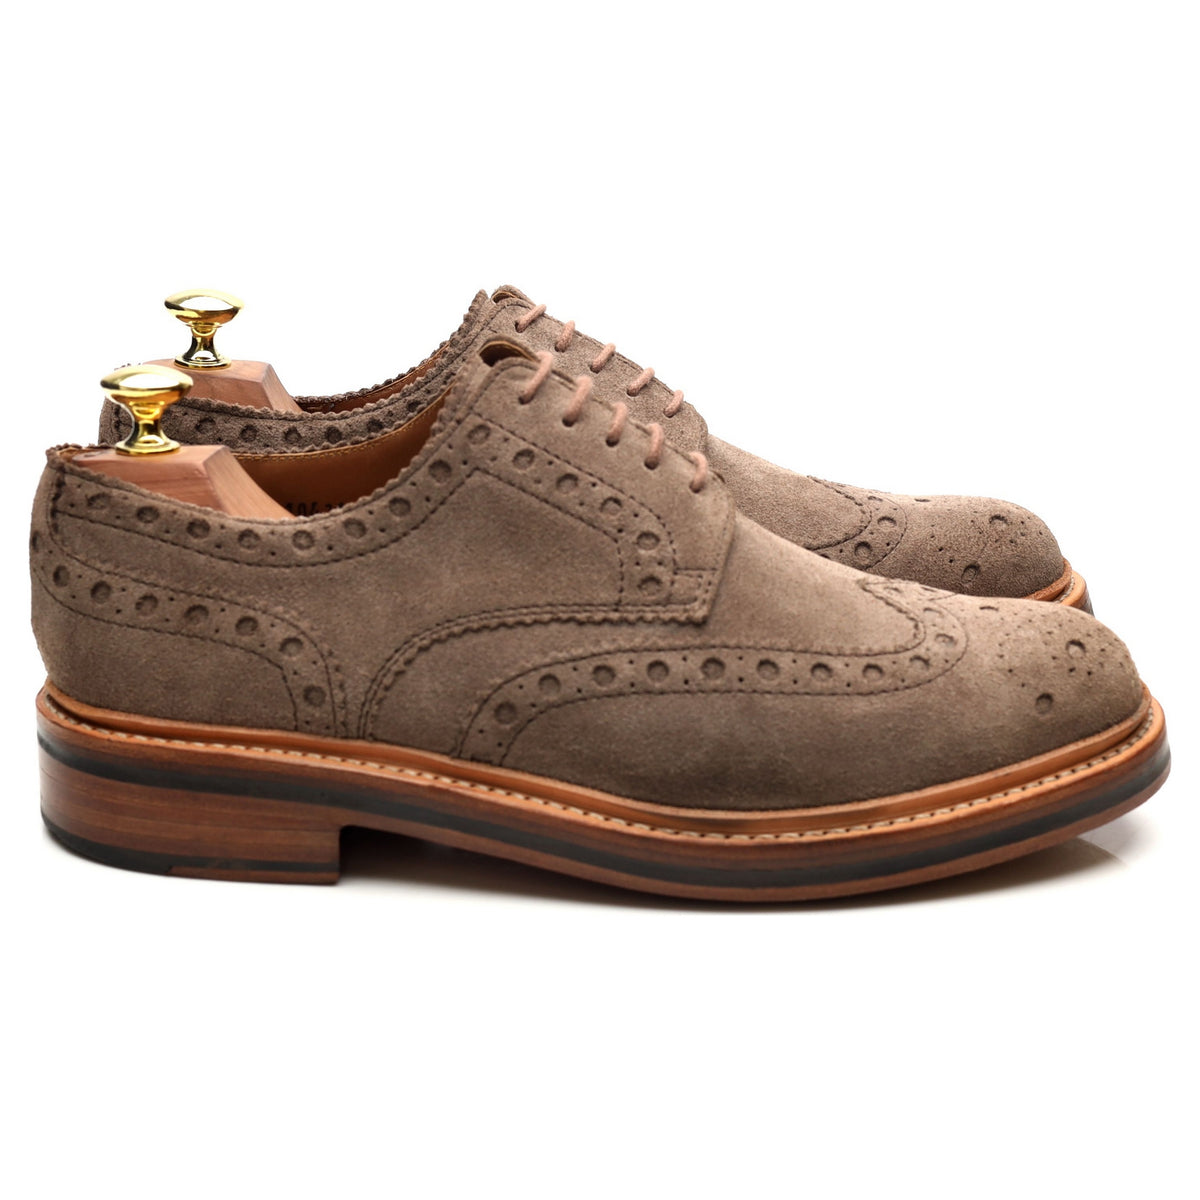 &#39;Archie&#39; Light Brown Suede Brogues UK 7.5 G